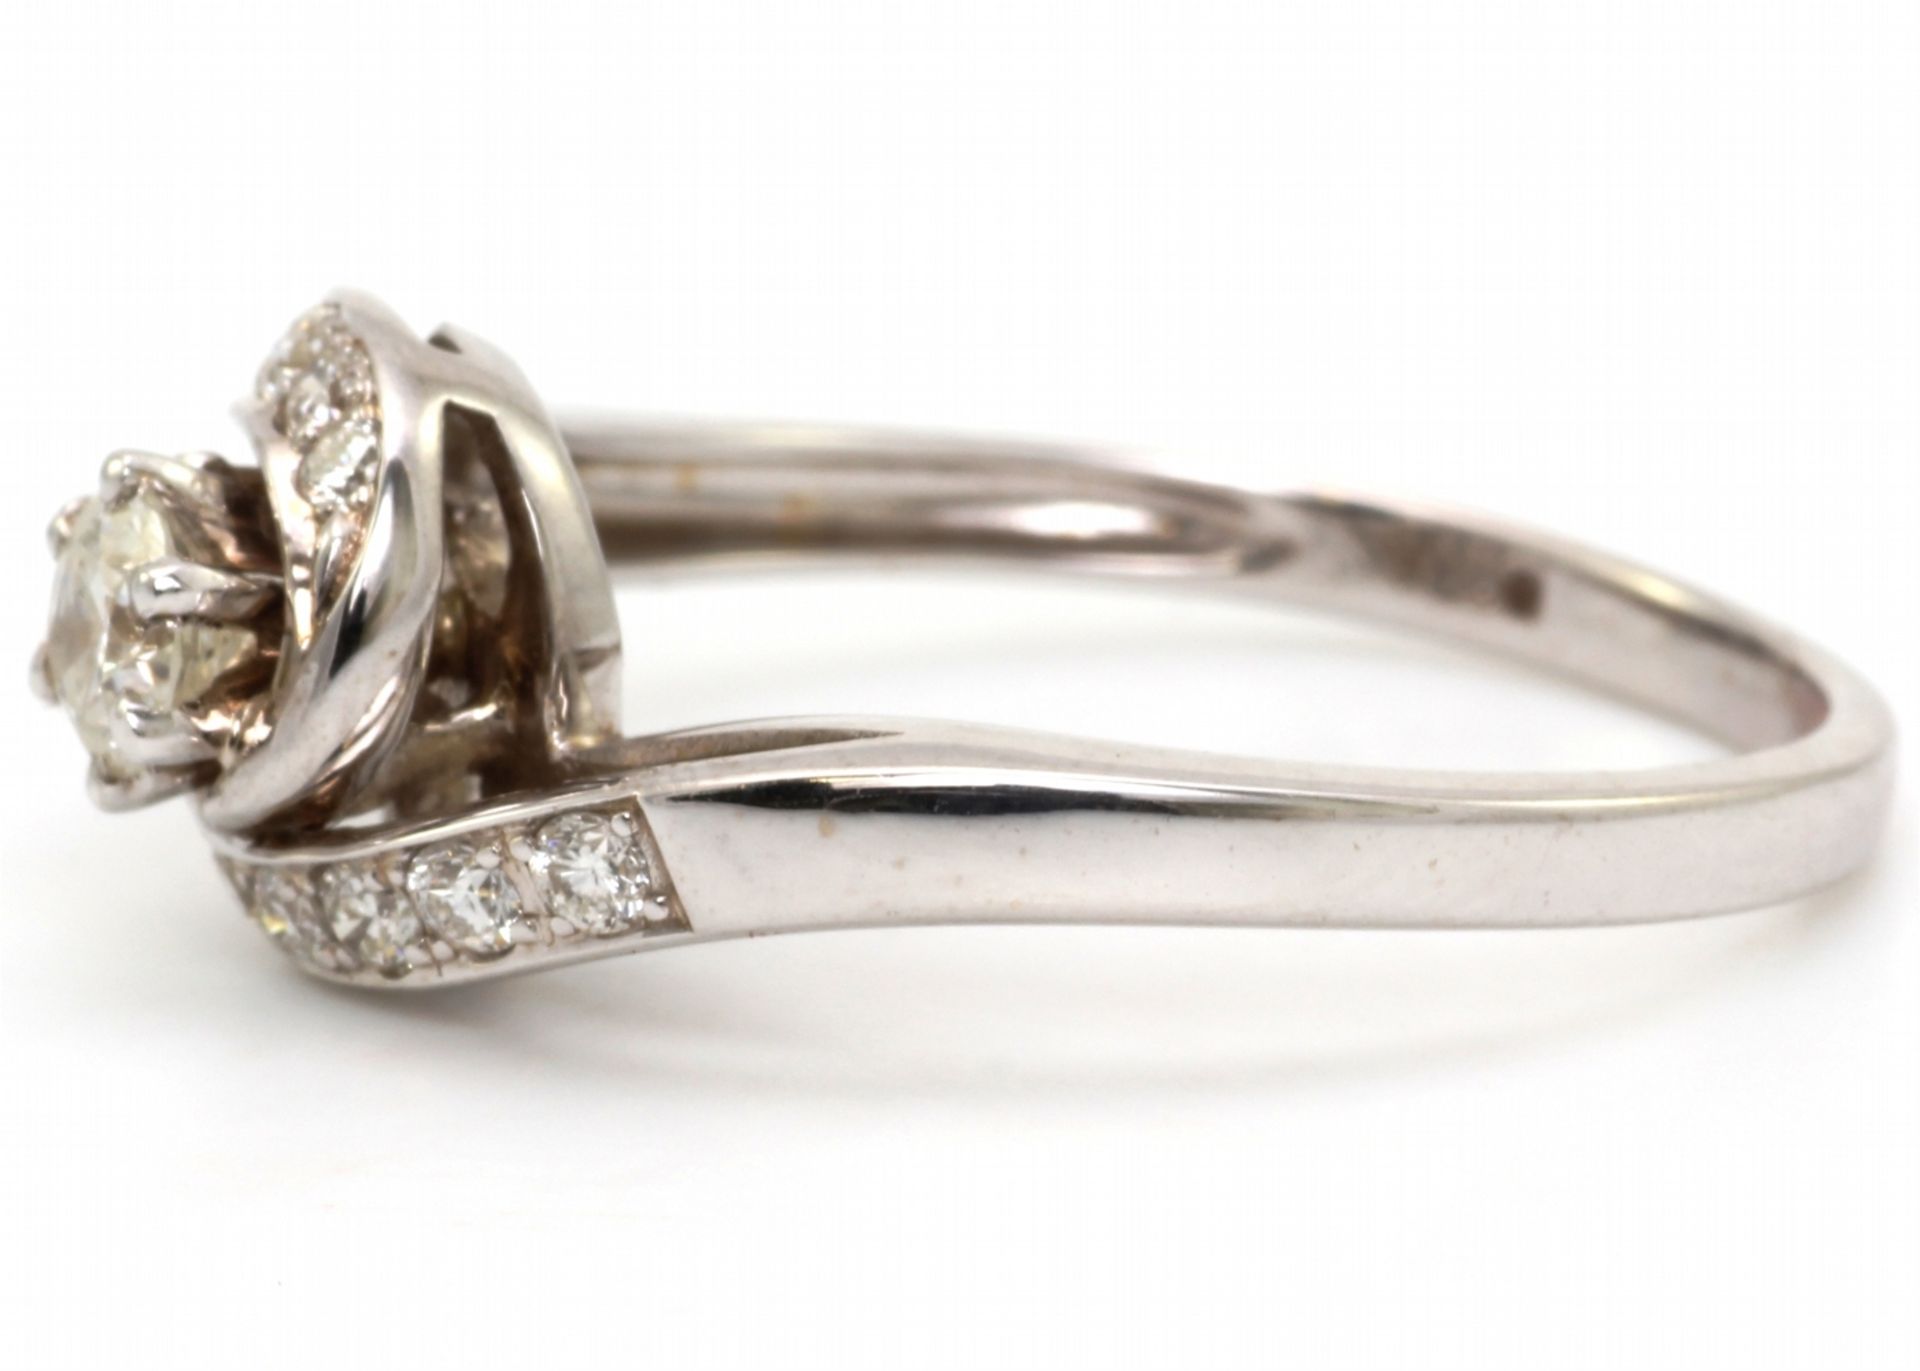 18ct White Gold Single Stone Twist Shoulders Diamond Ring (0.23) 0.43 Carats - Valued by AGI £2, - Image 3 of 4